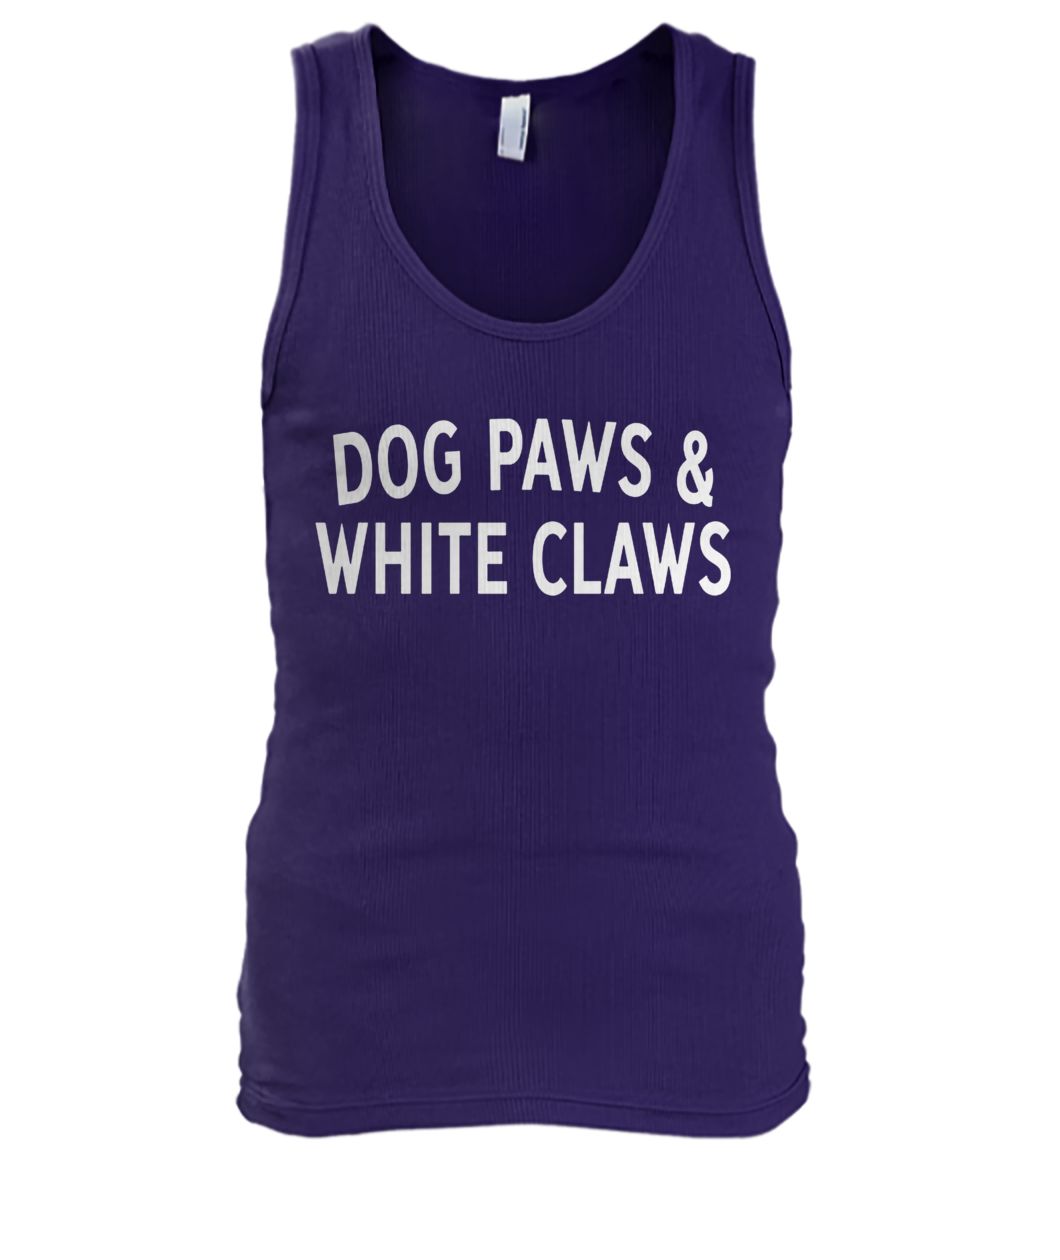 Dog paws and white claws men's tank top